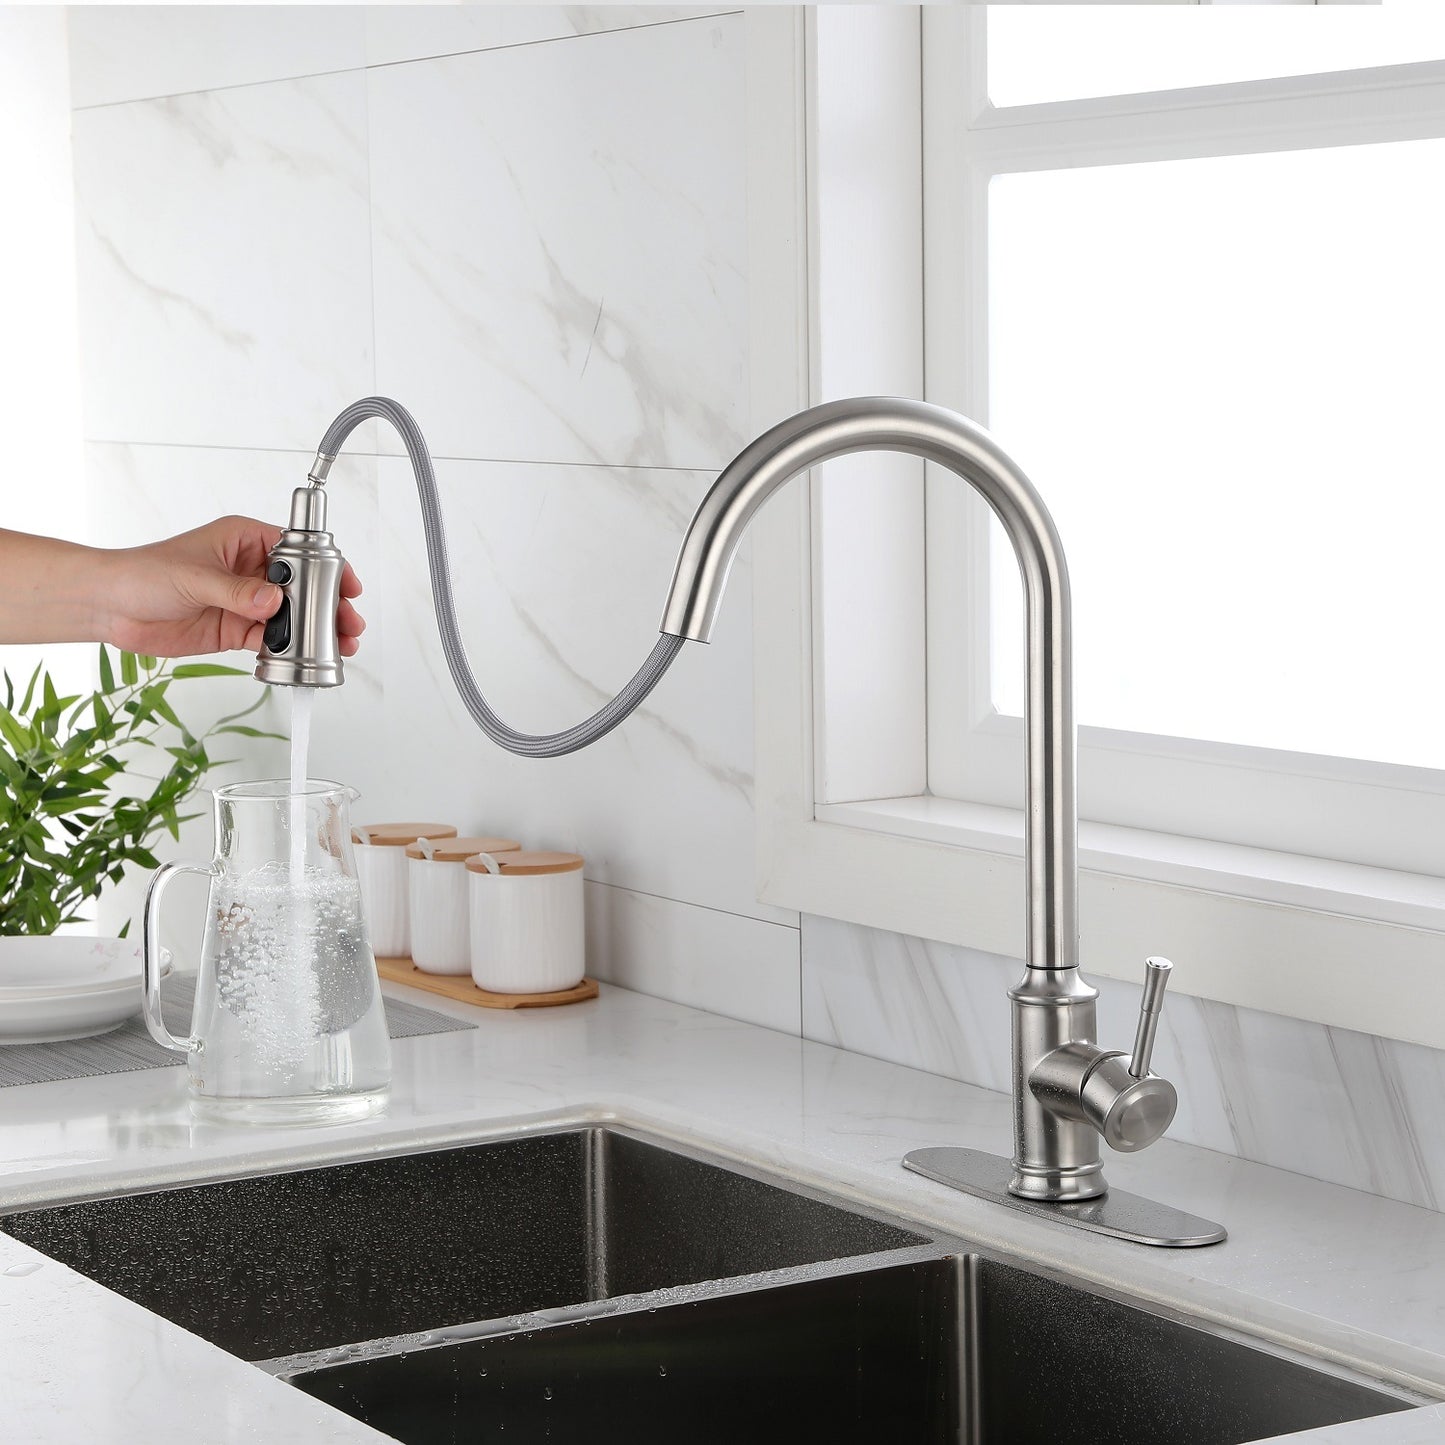 Touch Kitchen Faucet with Pull Down Sprayer,Single Handle High Arc  Pull out Kitchen Faucet,Single Level Stainless Steel Kitchen Sink Faucets with Pull down Sprayer